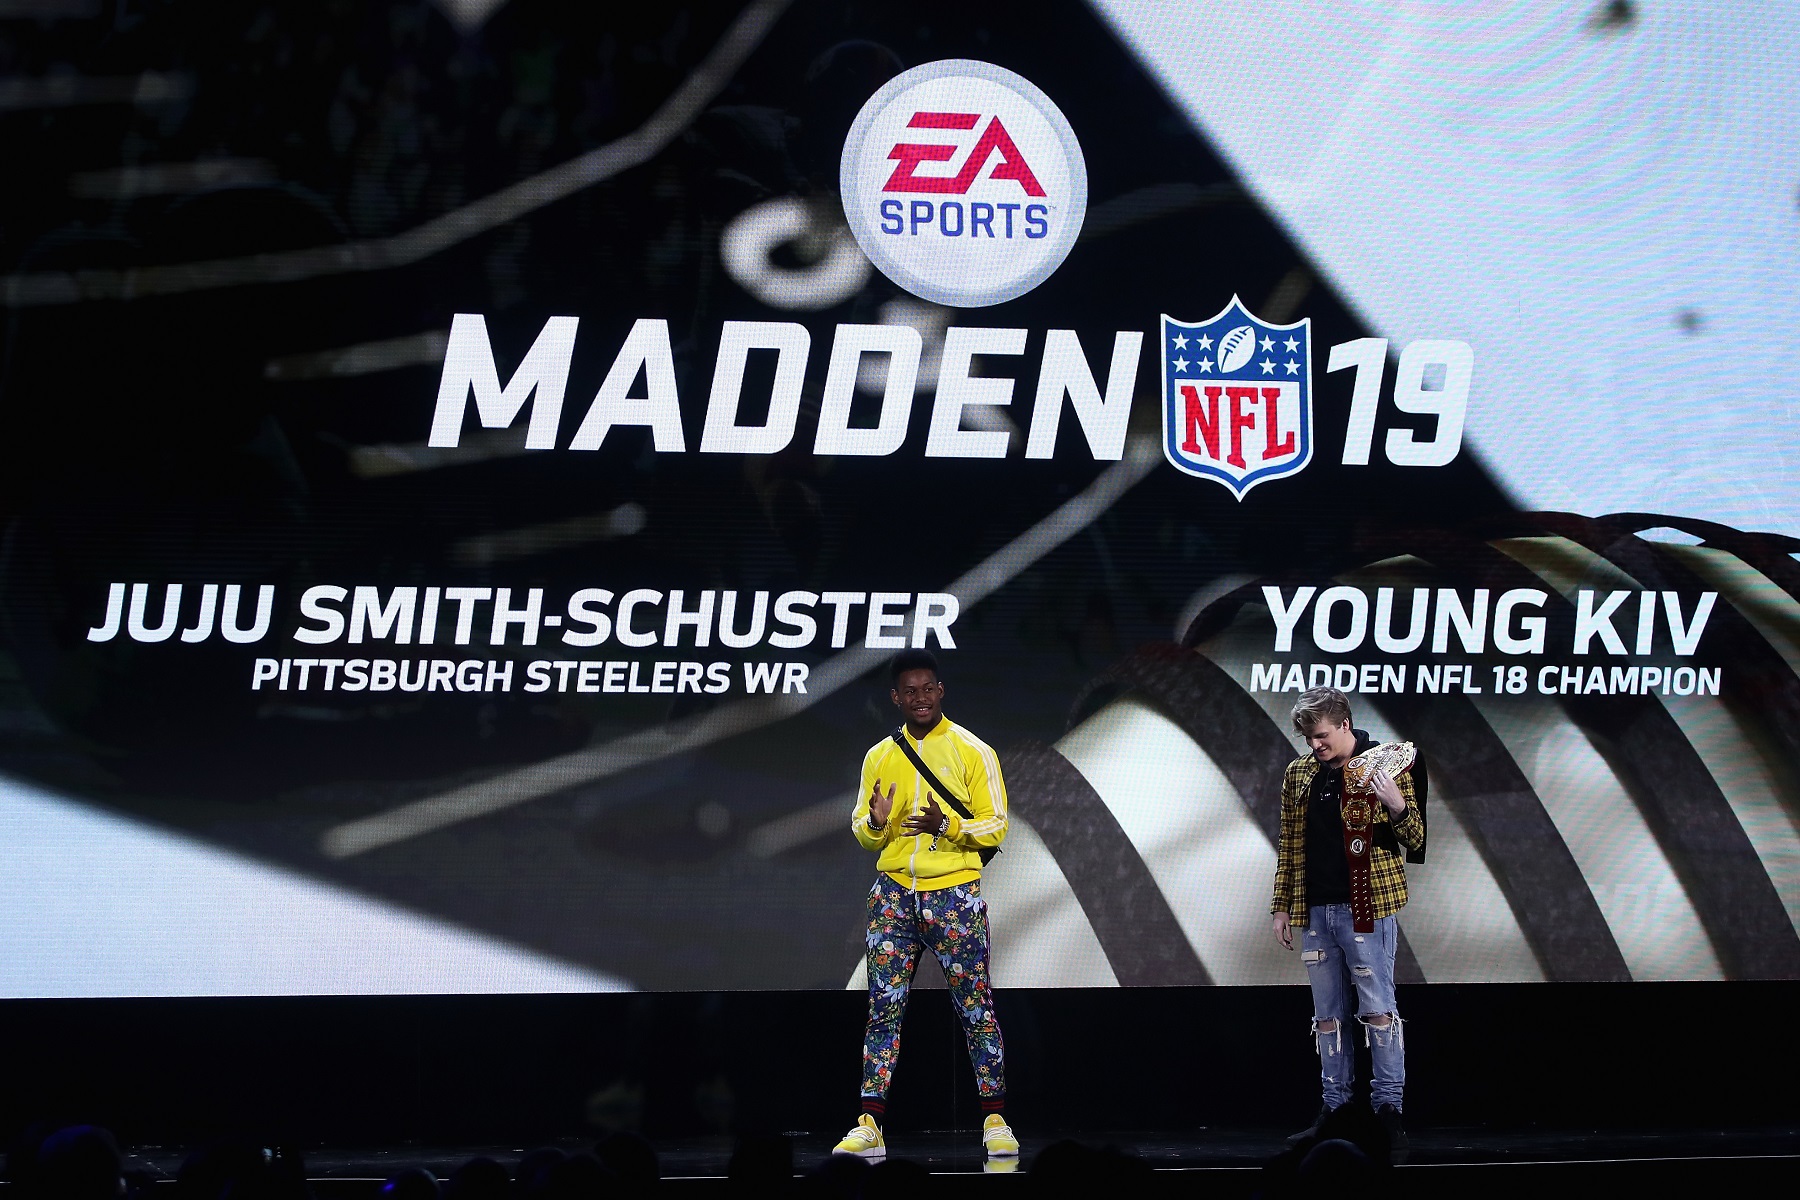 Flags Are Down, and the Maker of Madden NFL Faces More Than a 15-Yard Penalty